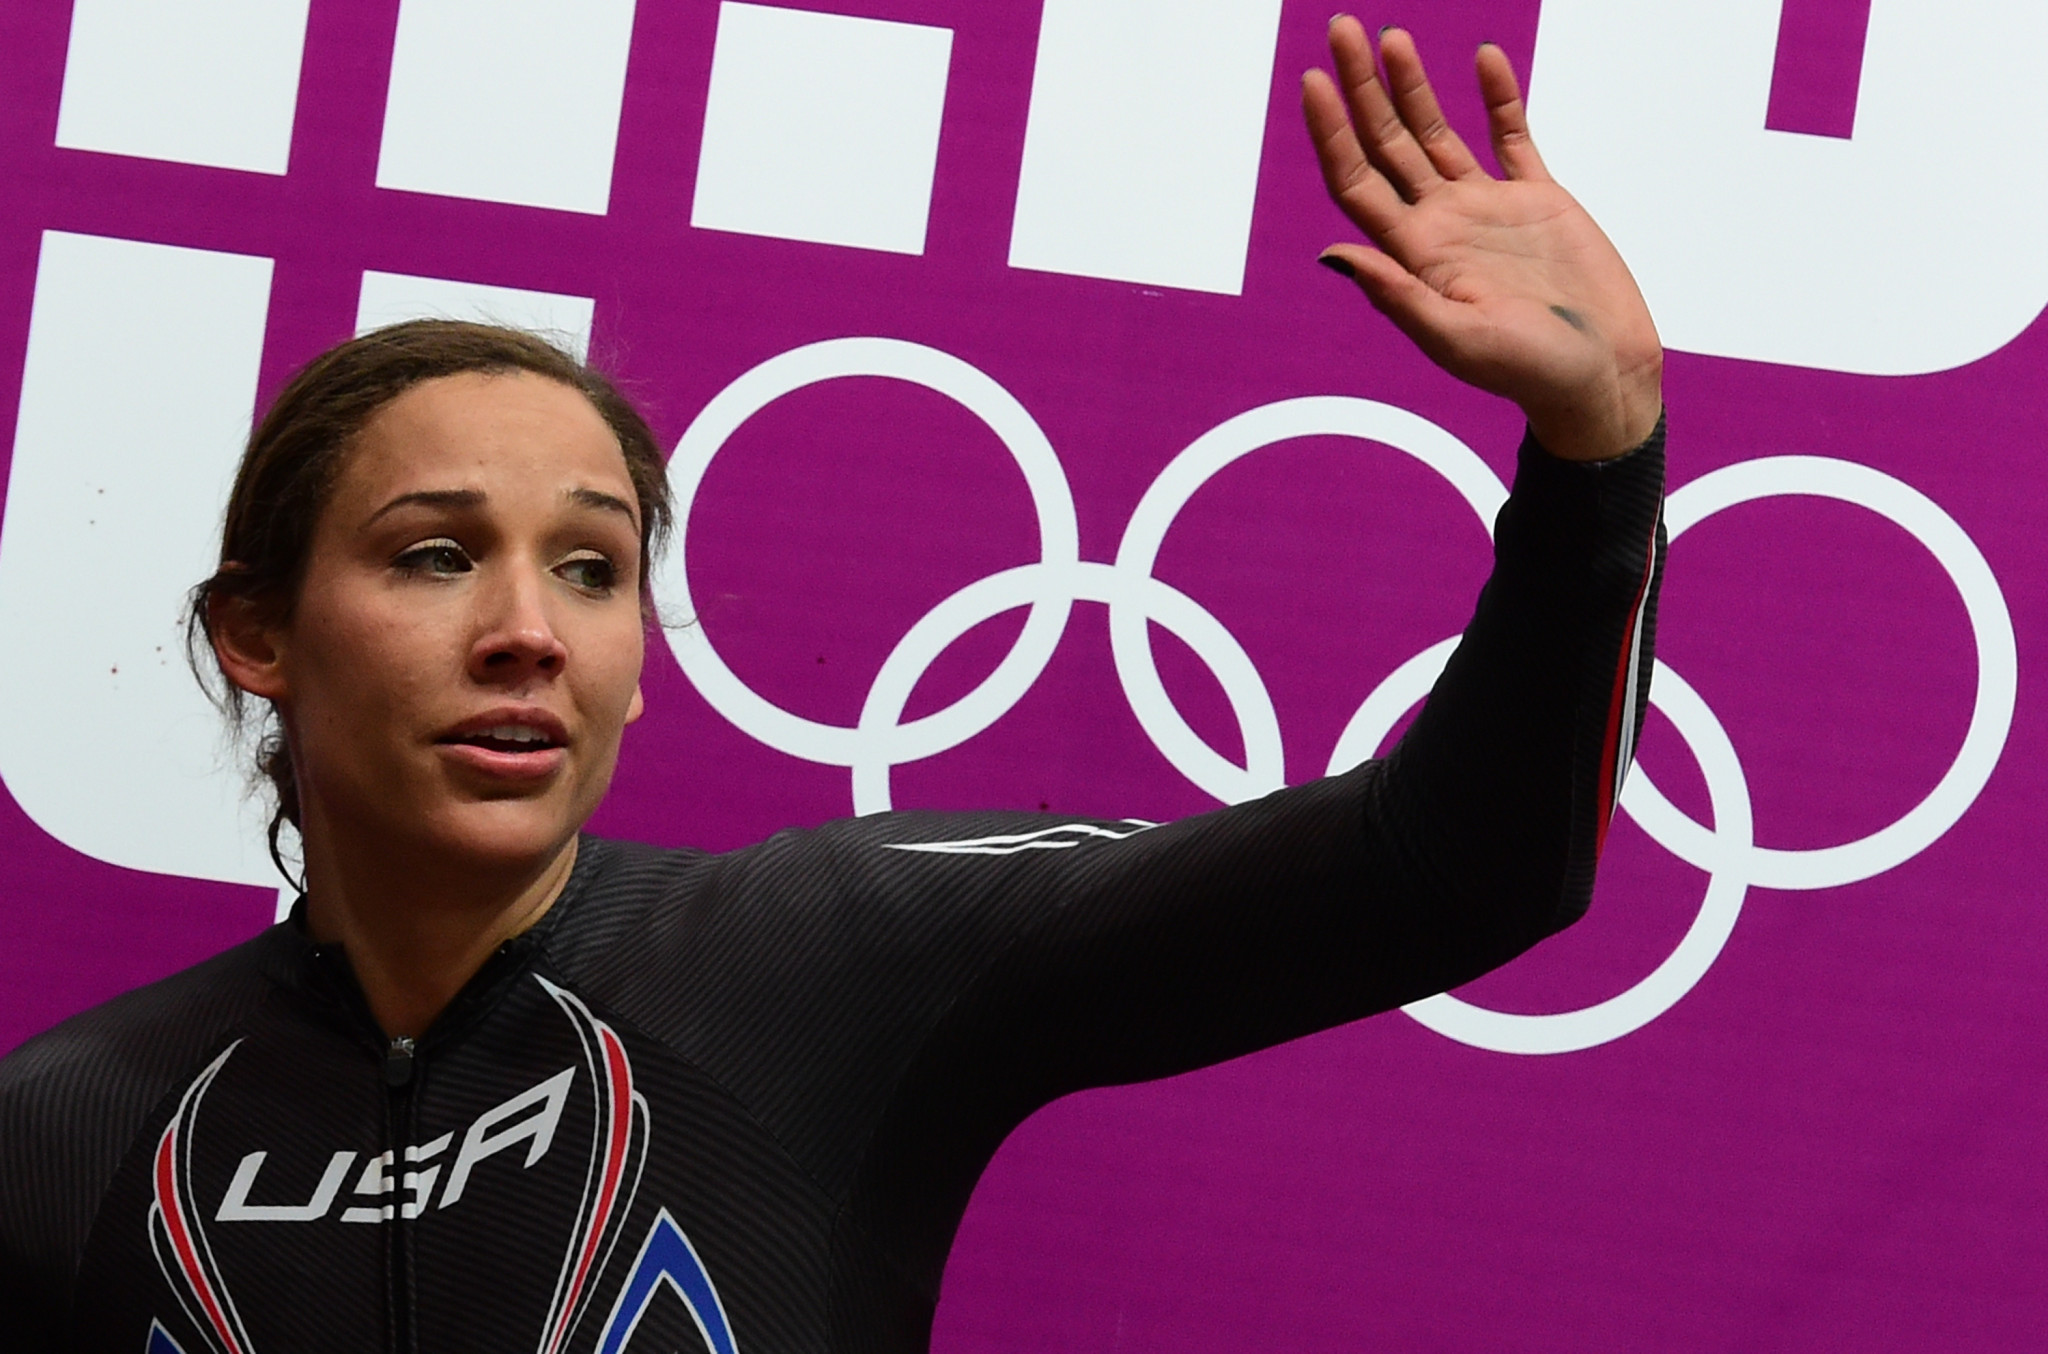 Summer and Winter Olympian Jones returns to US bobsleigh squad